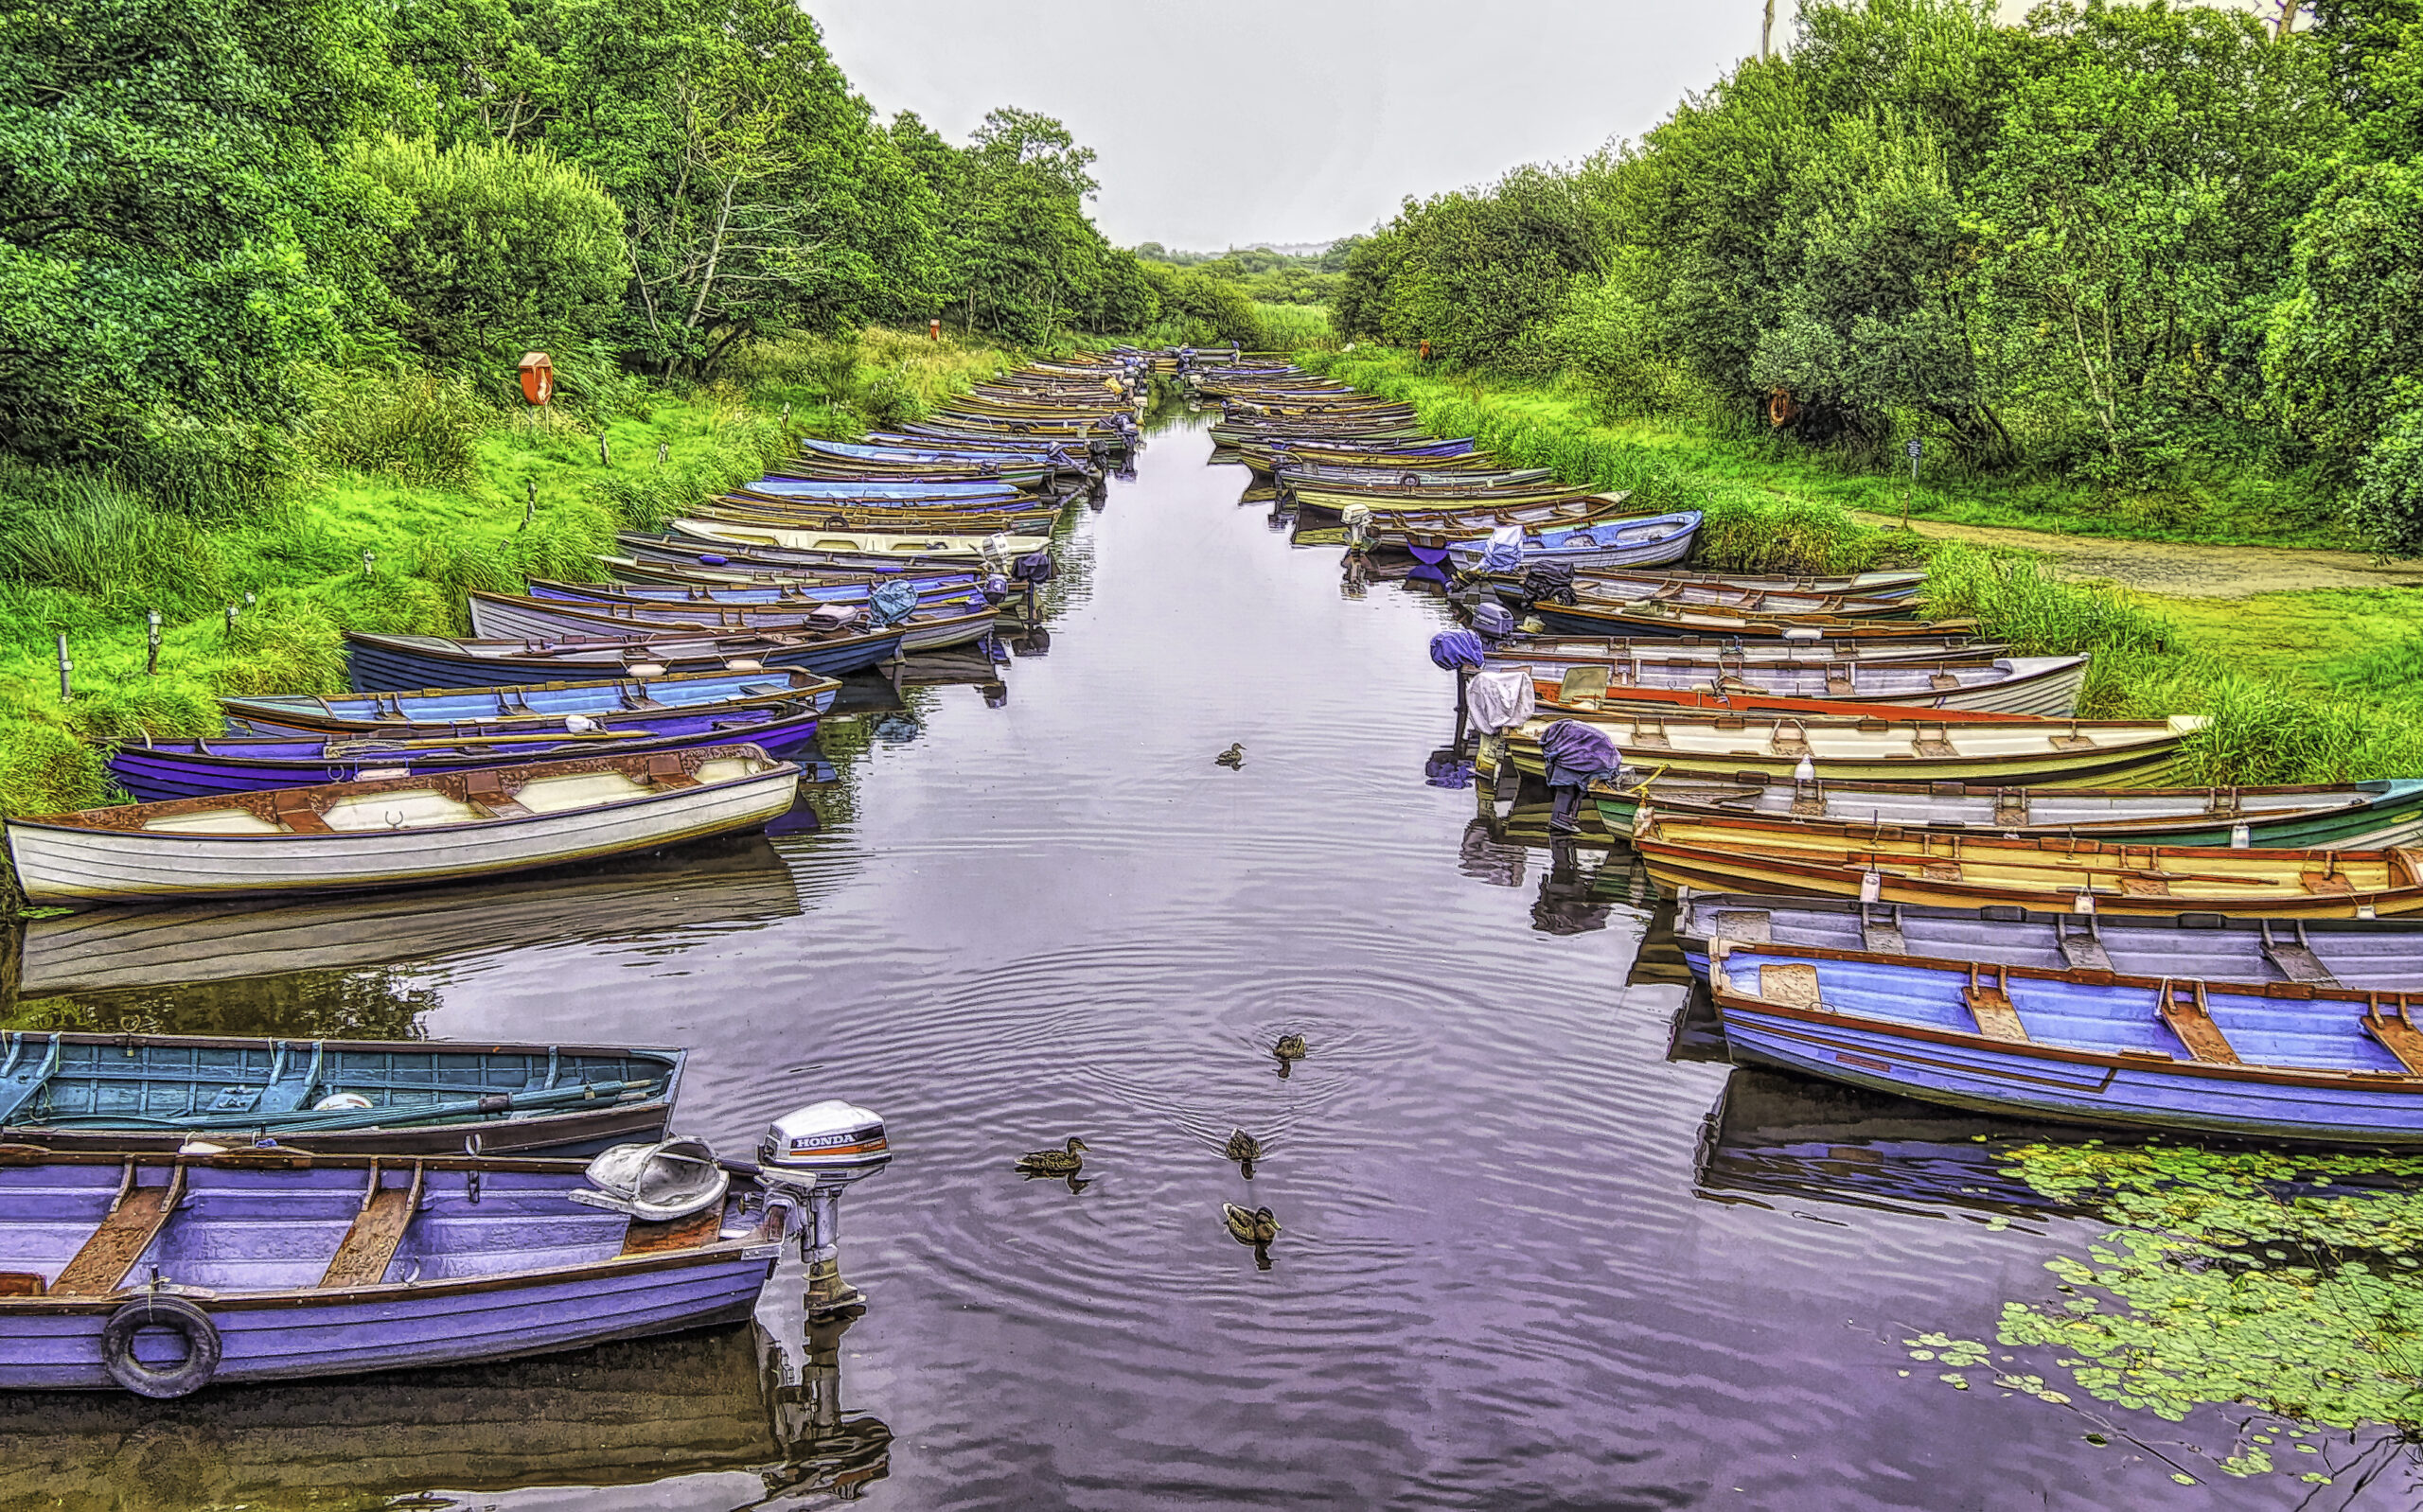 Boats lined up on both sides of a stream in Killarney, Ireland